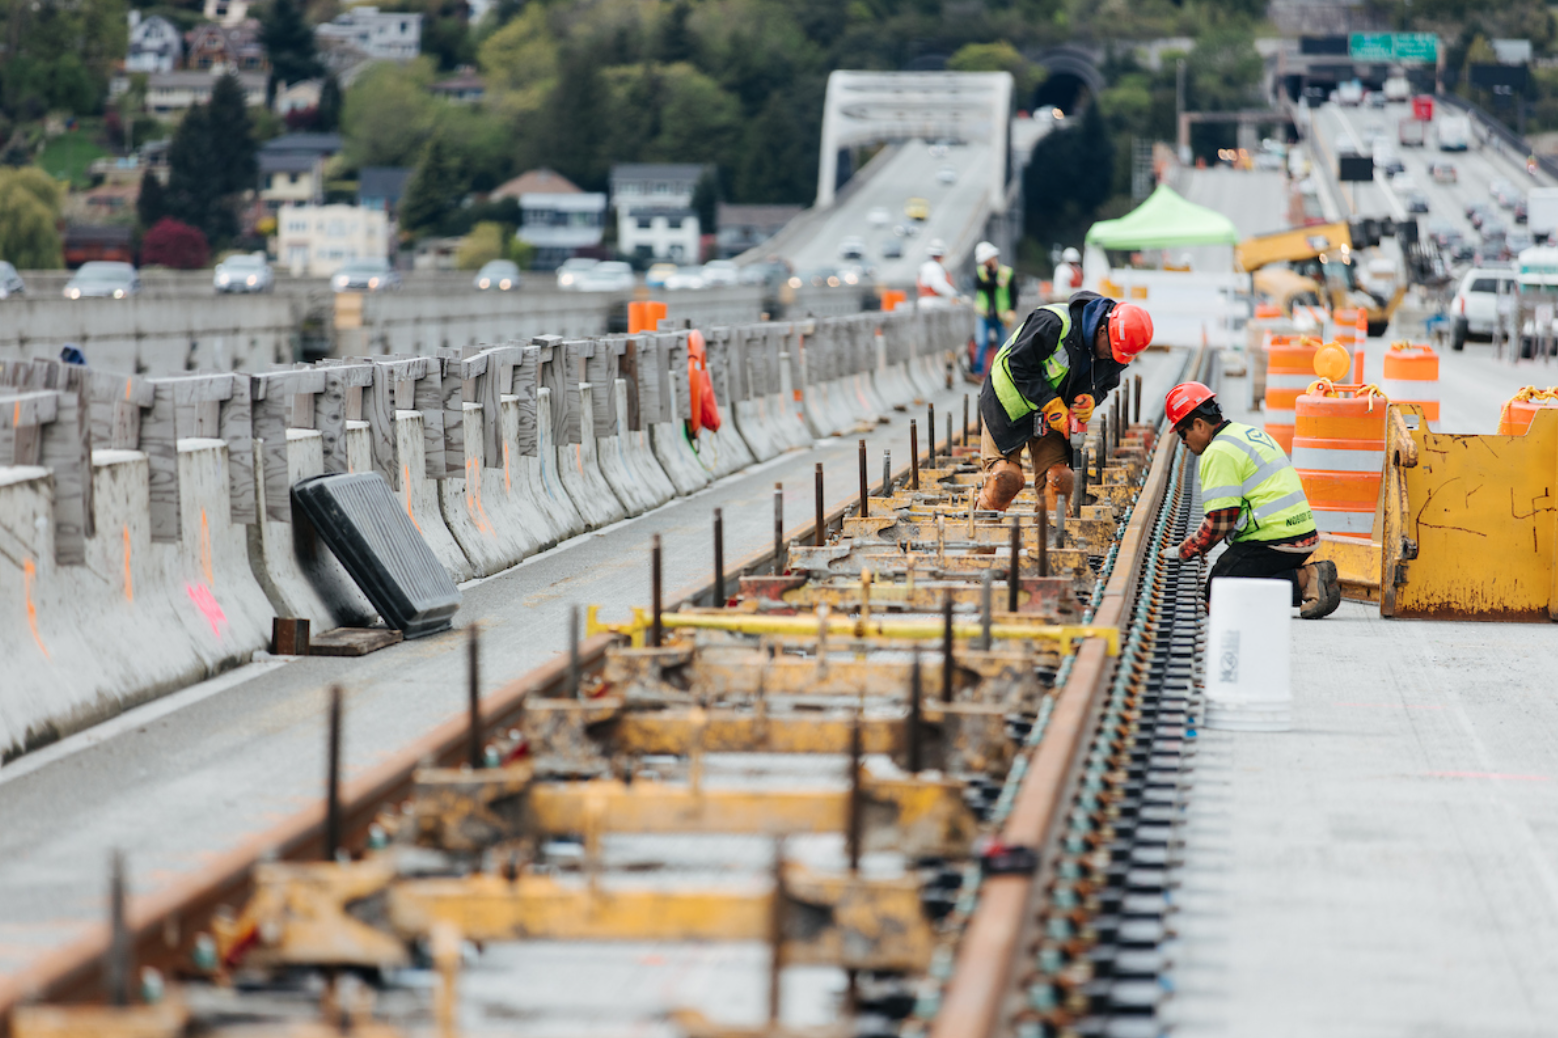 New Delay to Sound Transit’s Light Rail after Issue Found on Floating Bridge